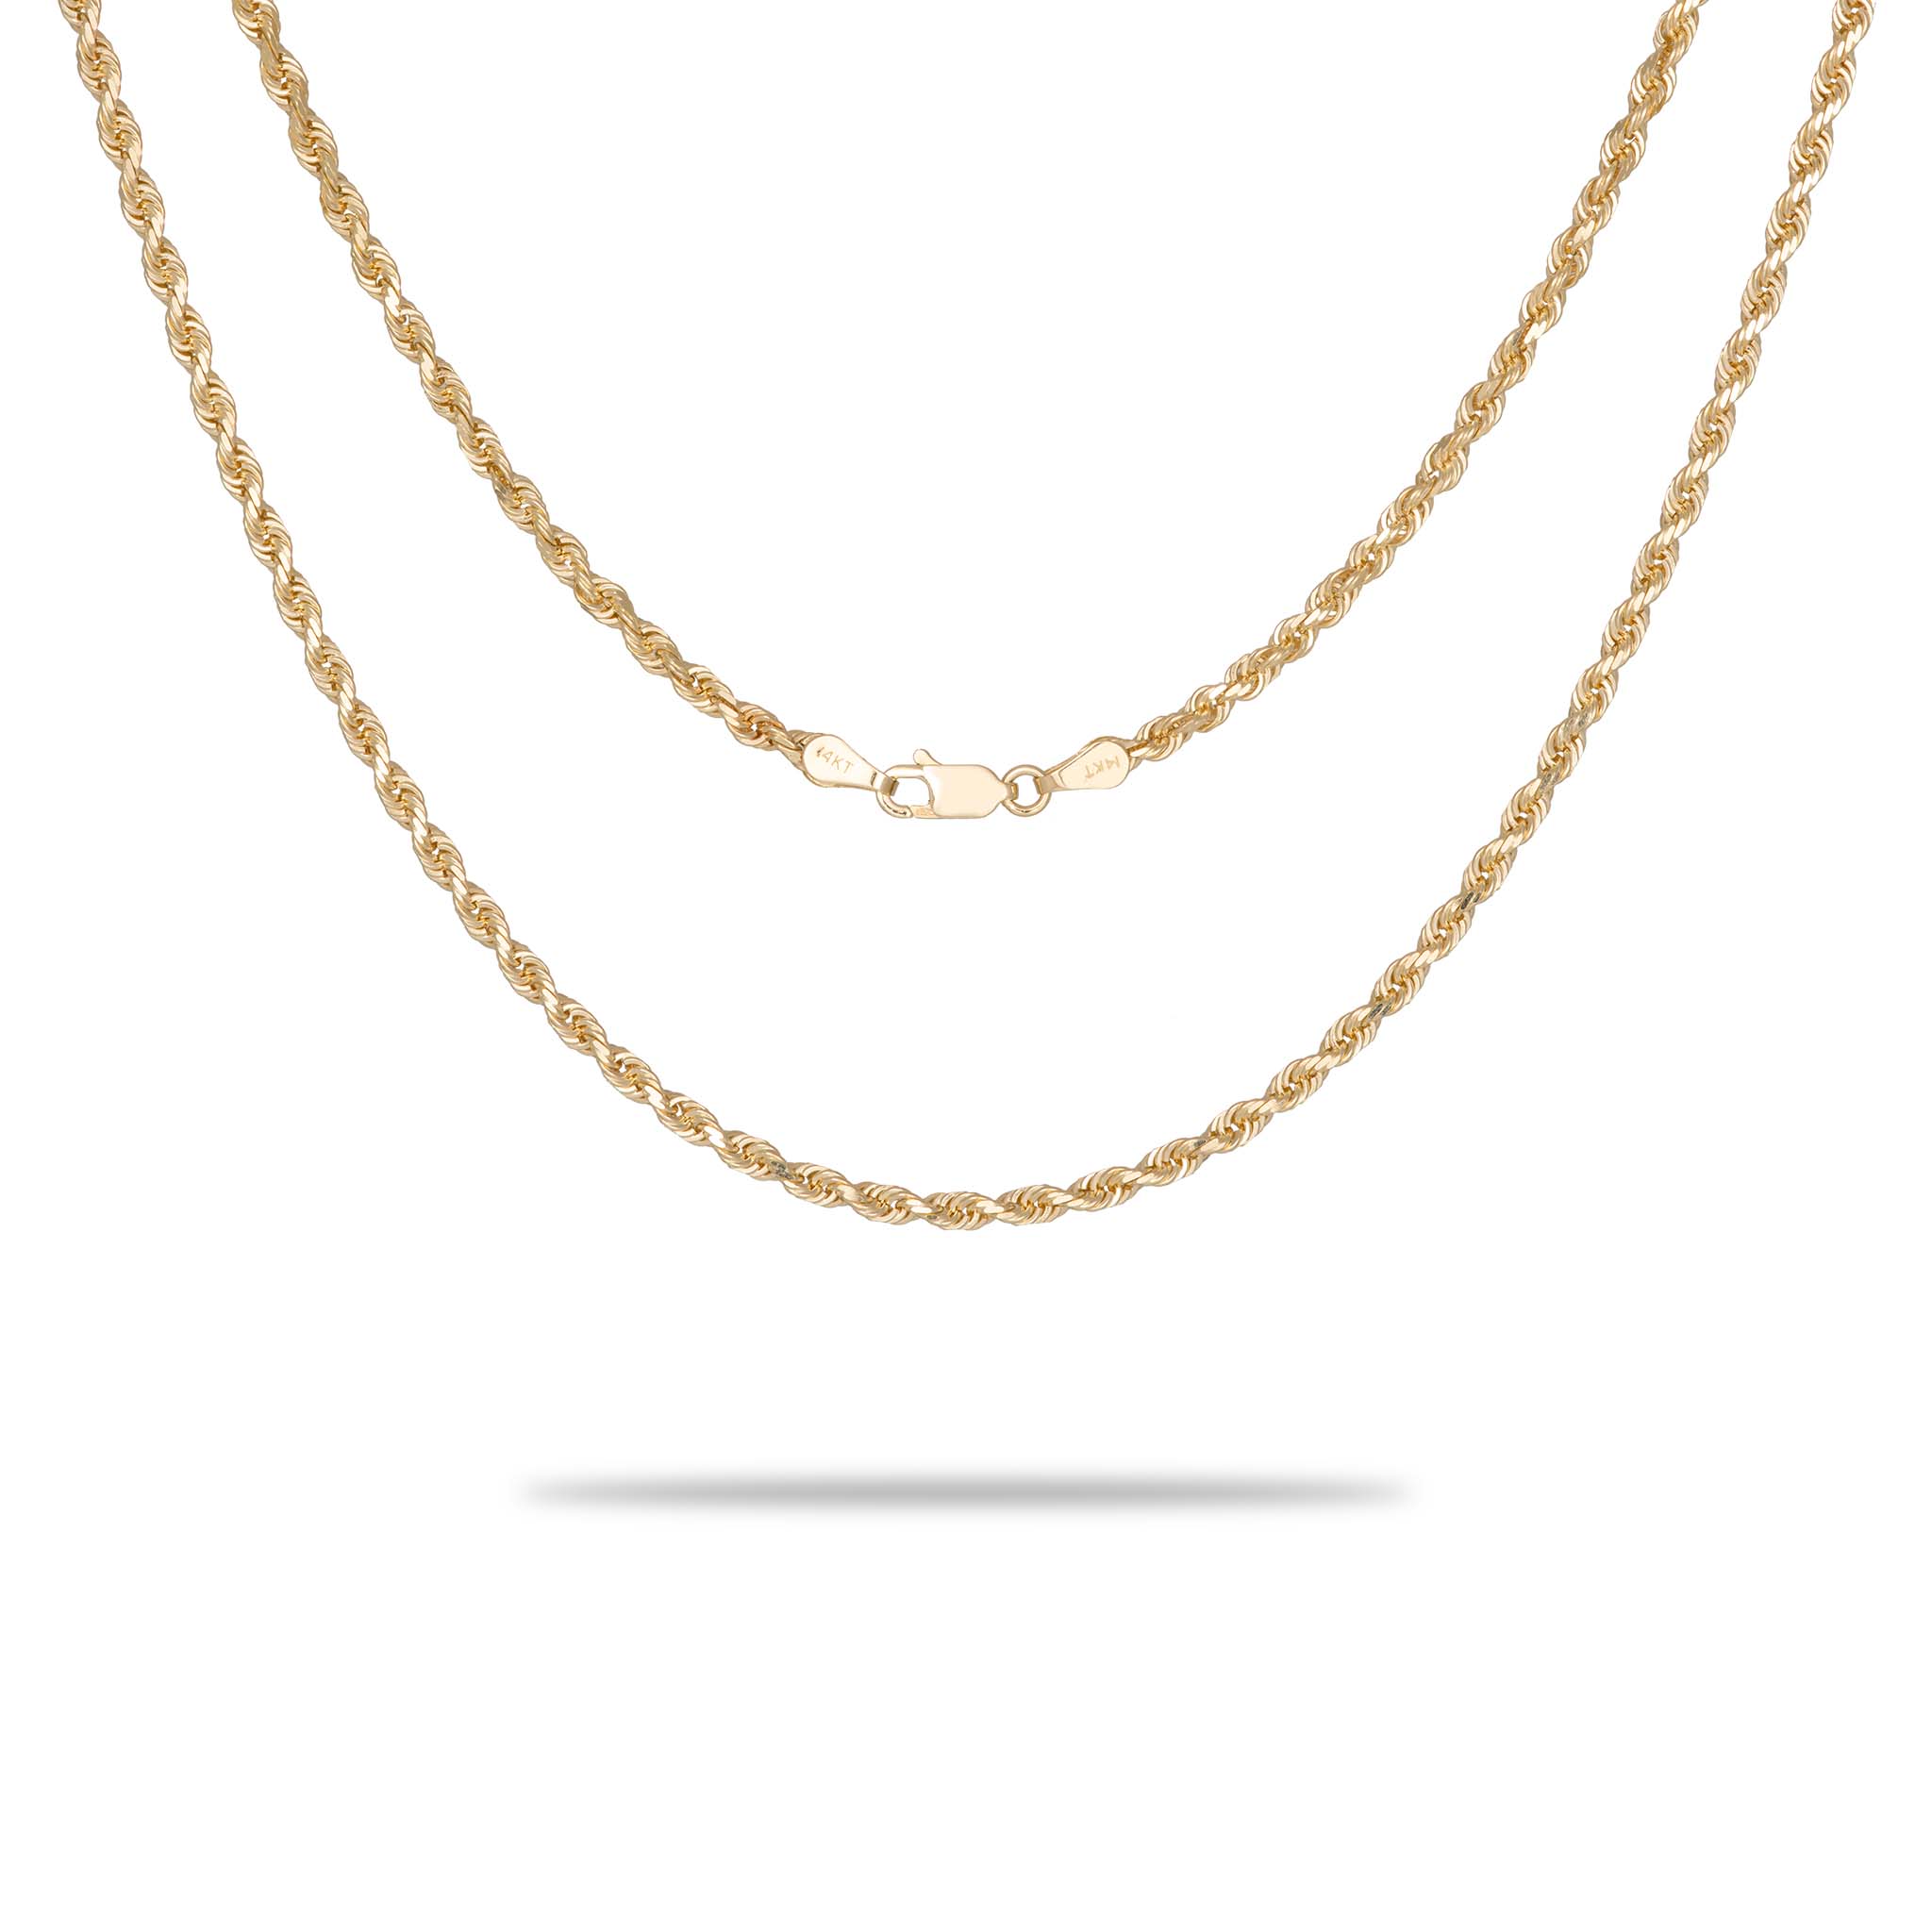 A 3mm Rope Chain in Gold with a clasp on a white background from Maui Divers Jewelry.	